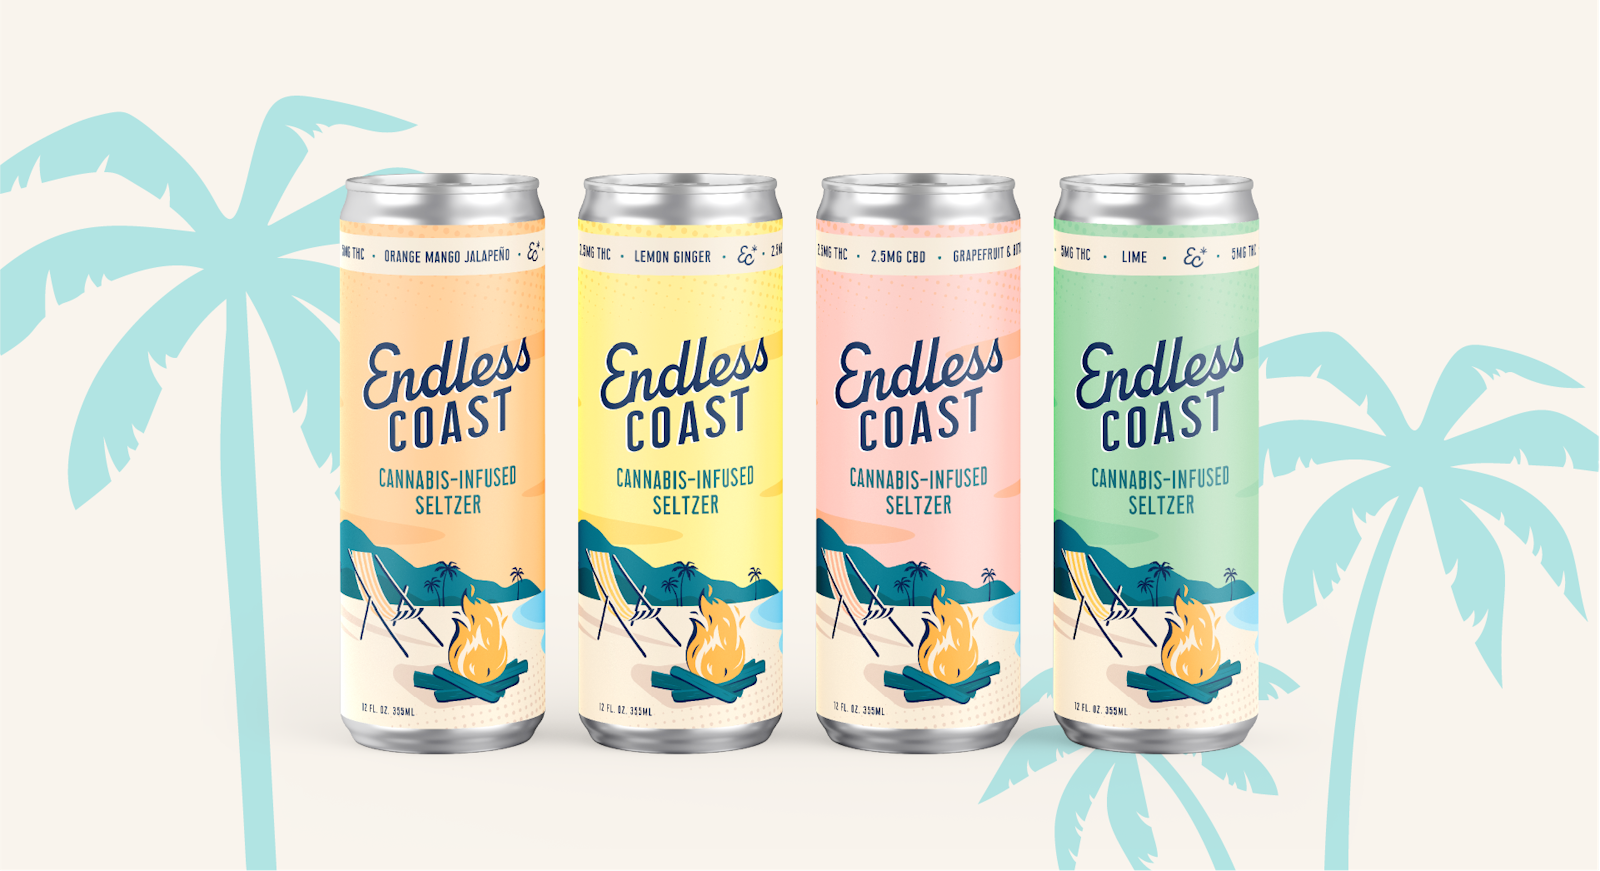 The Endless Coast brand packaging design in four flavors with palm tree graphics.